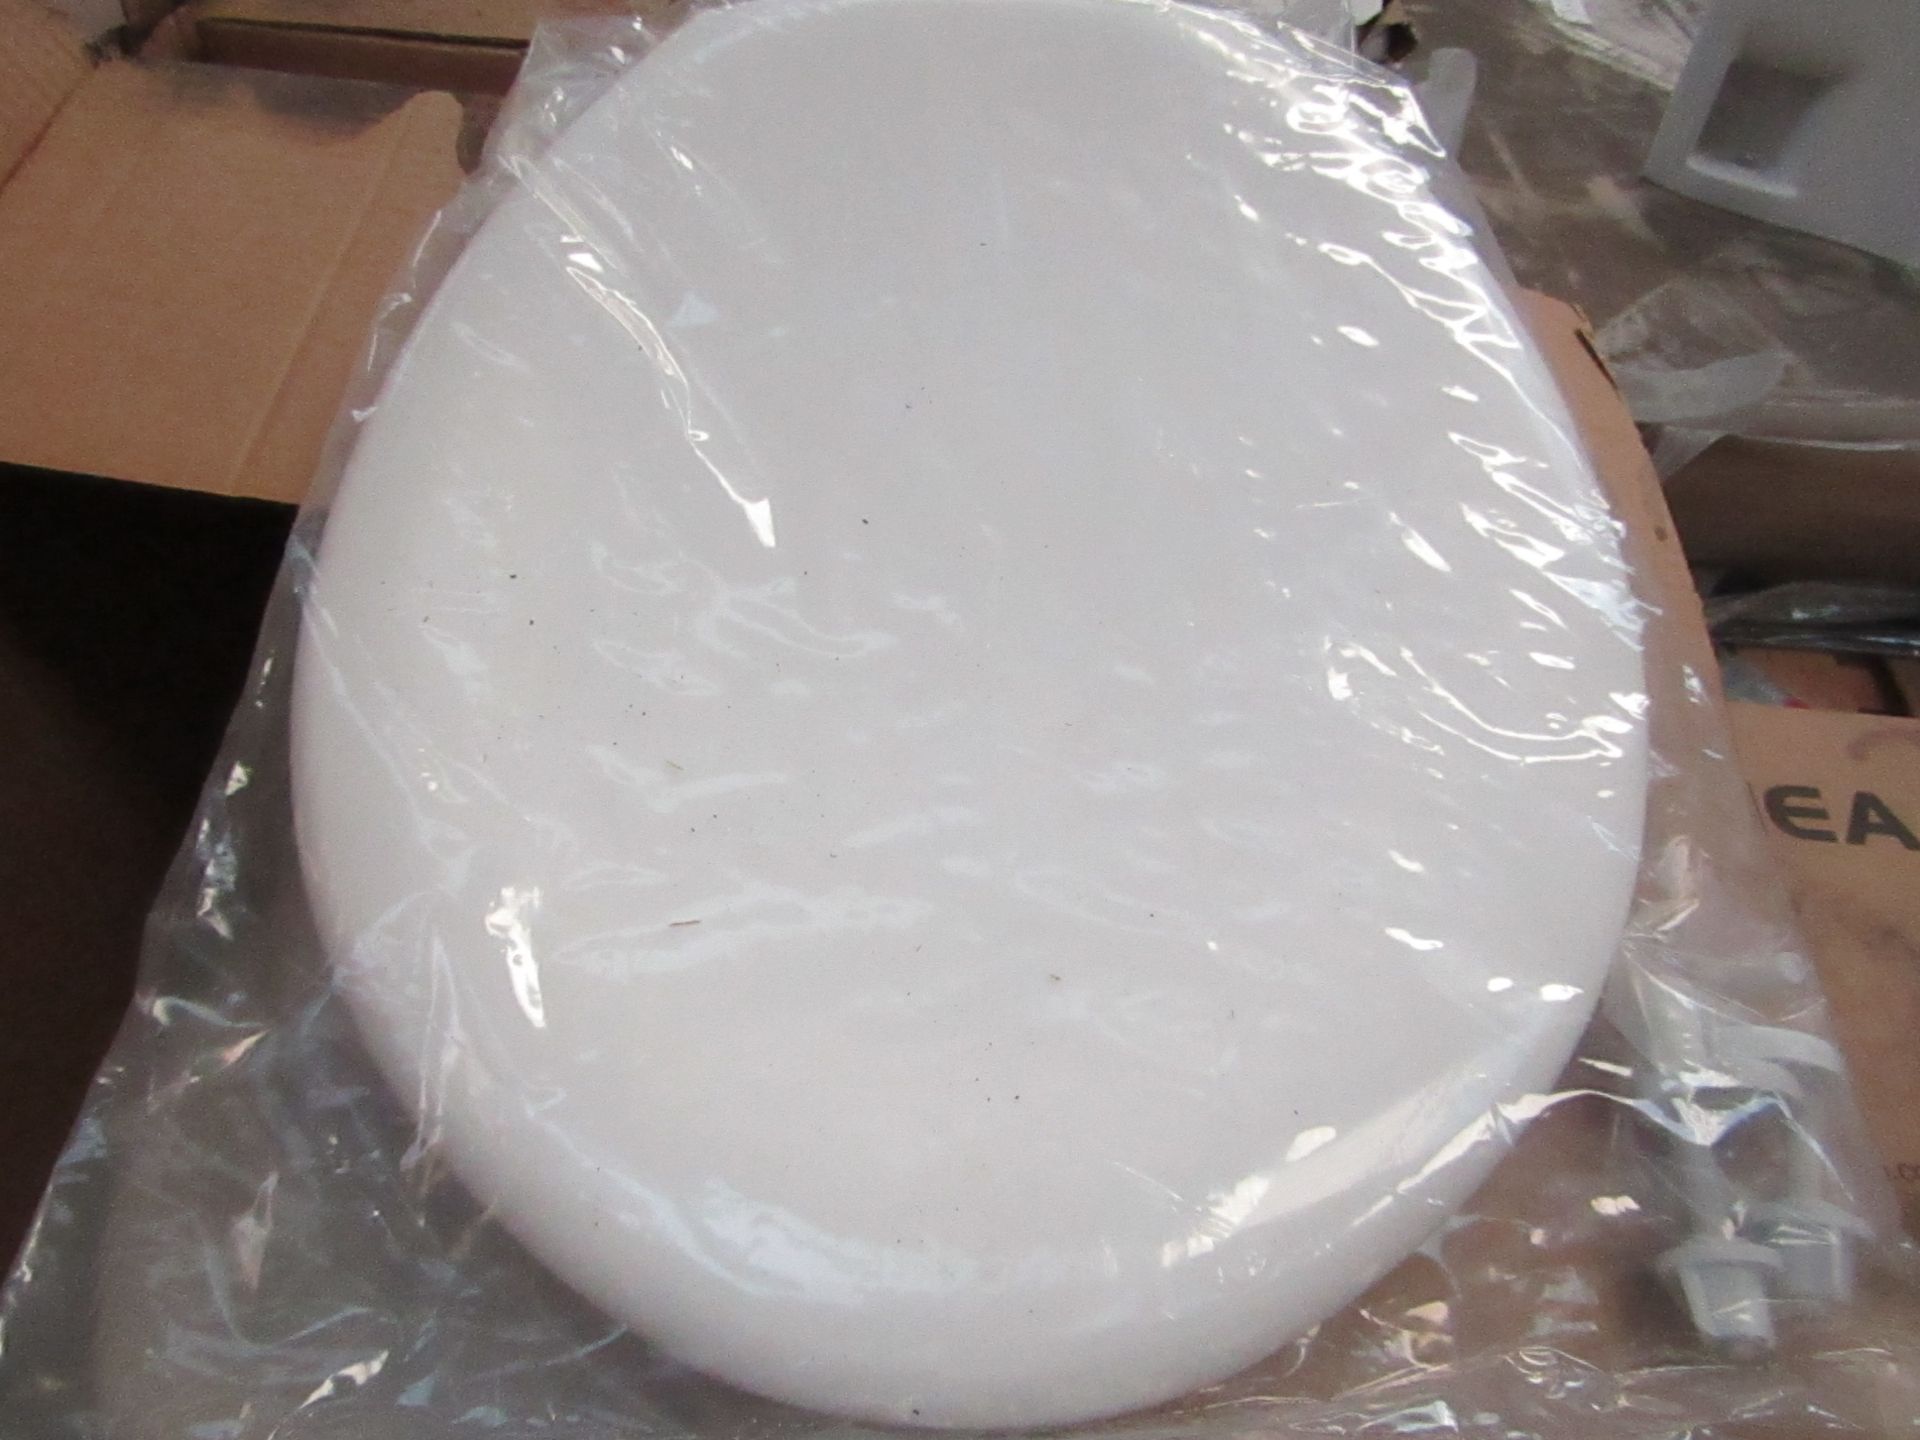 5x Unbranded Roca toilet seats, new and packaged.